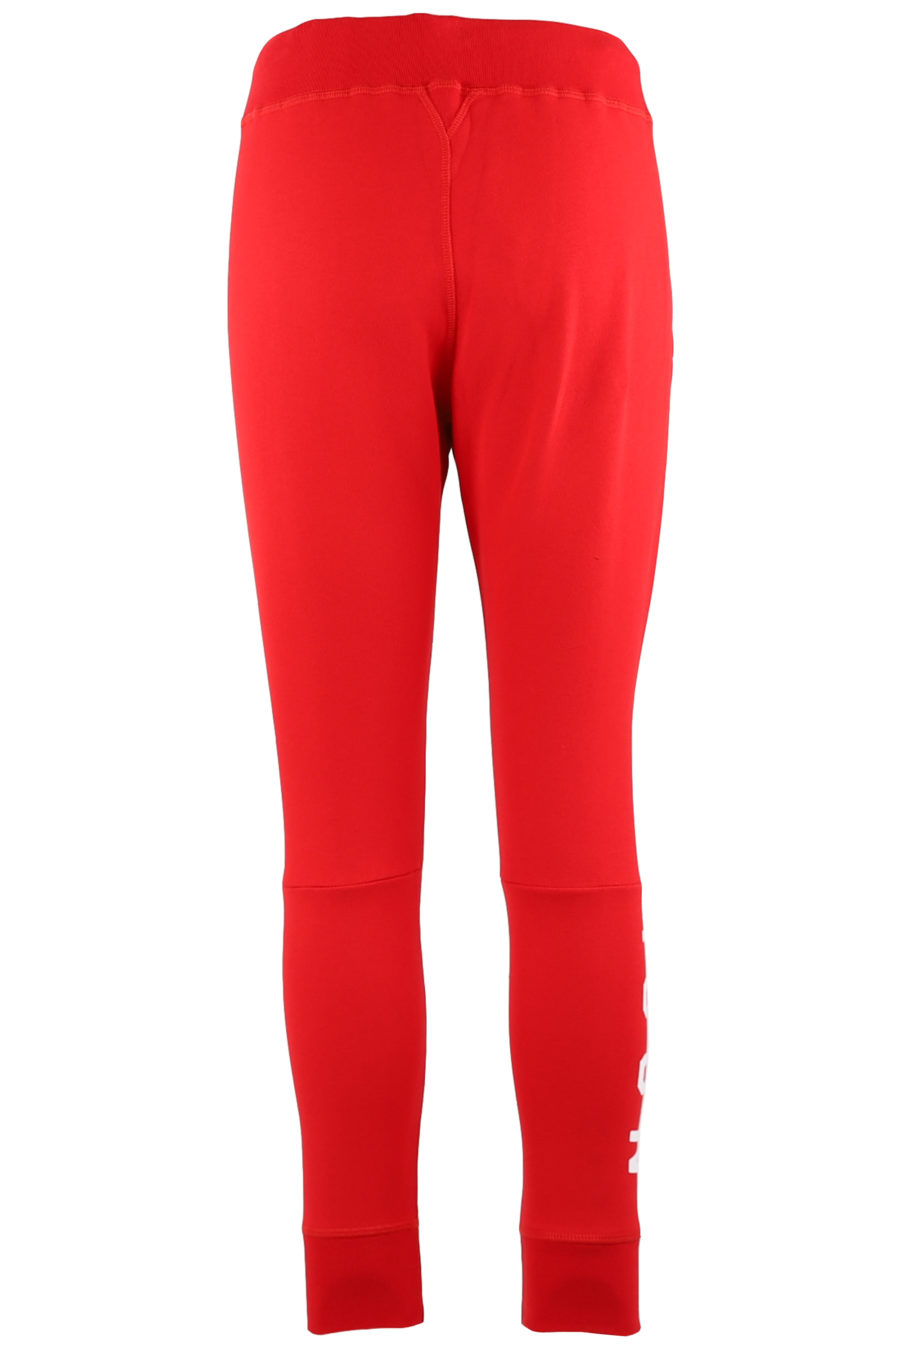 Tracksuit bottoms red with white logo "Icon" - d1aa3f562fe8adbbc892f22965757824eea91dfb